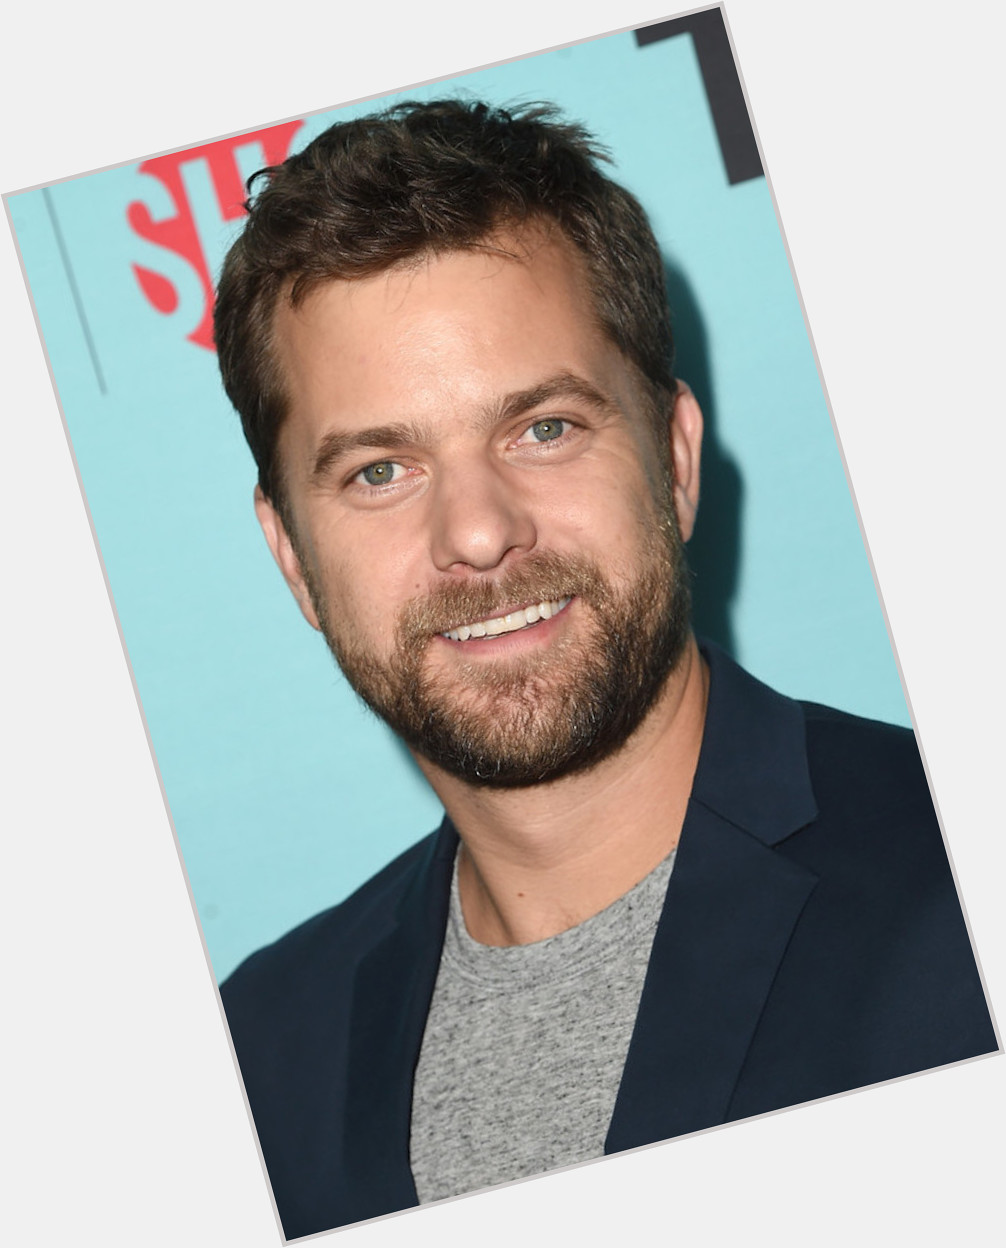 Happy Birthday, Joshua Jackson
For Disney, he portrayed Charlie Conway in trilogy. 